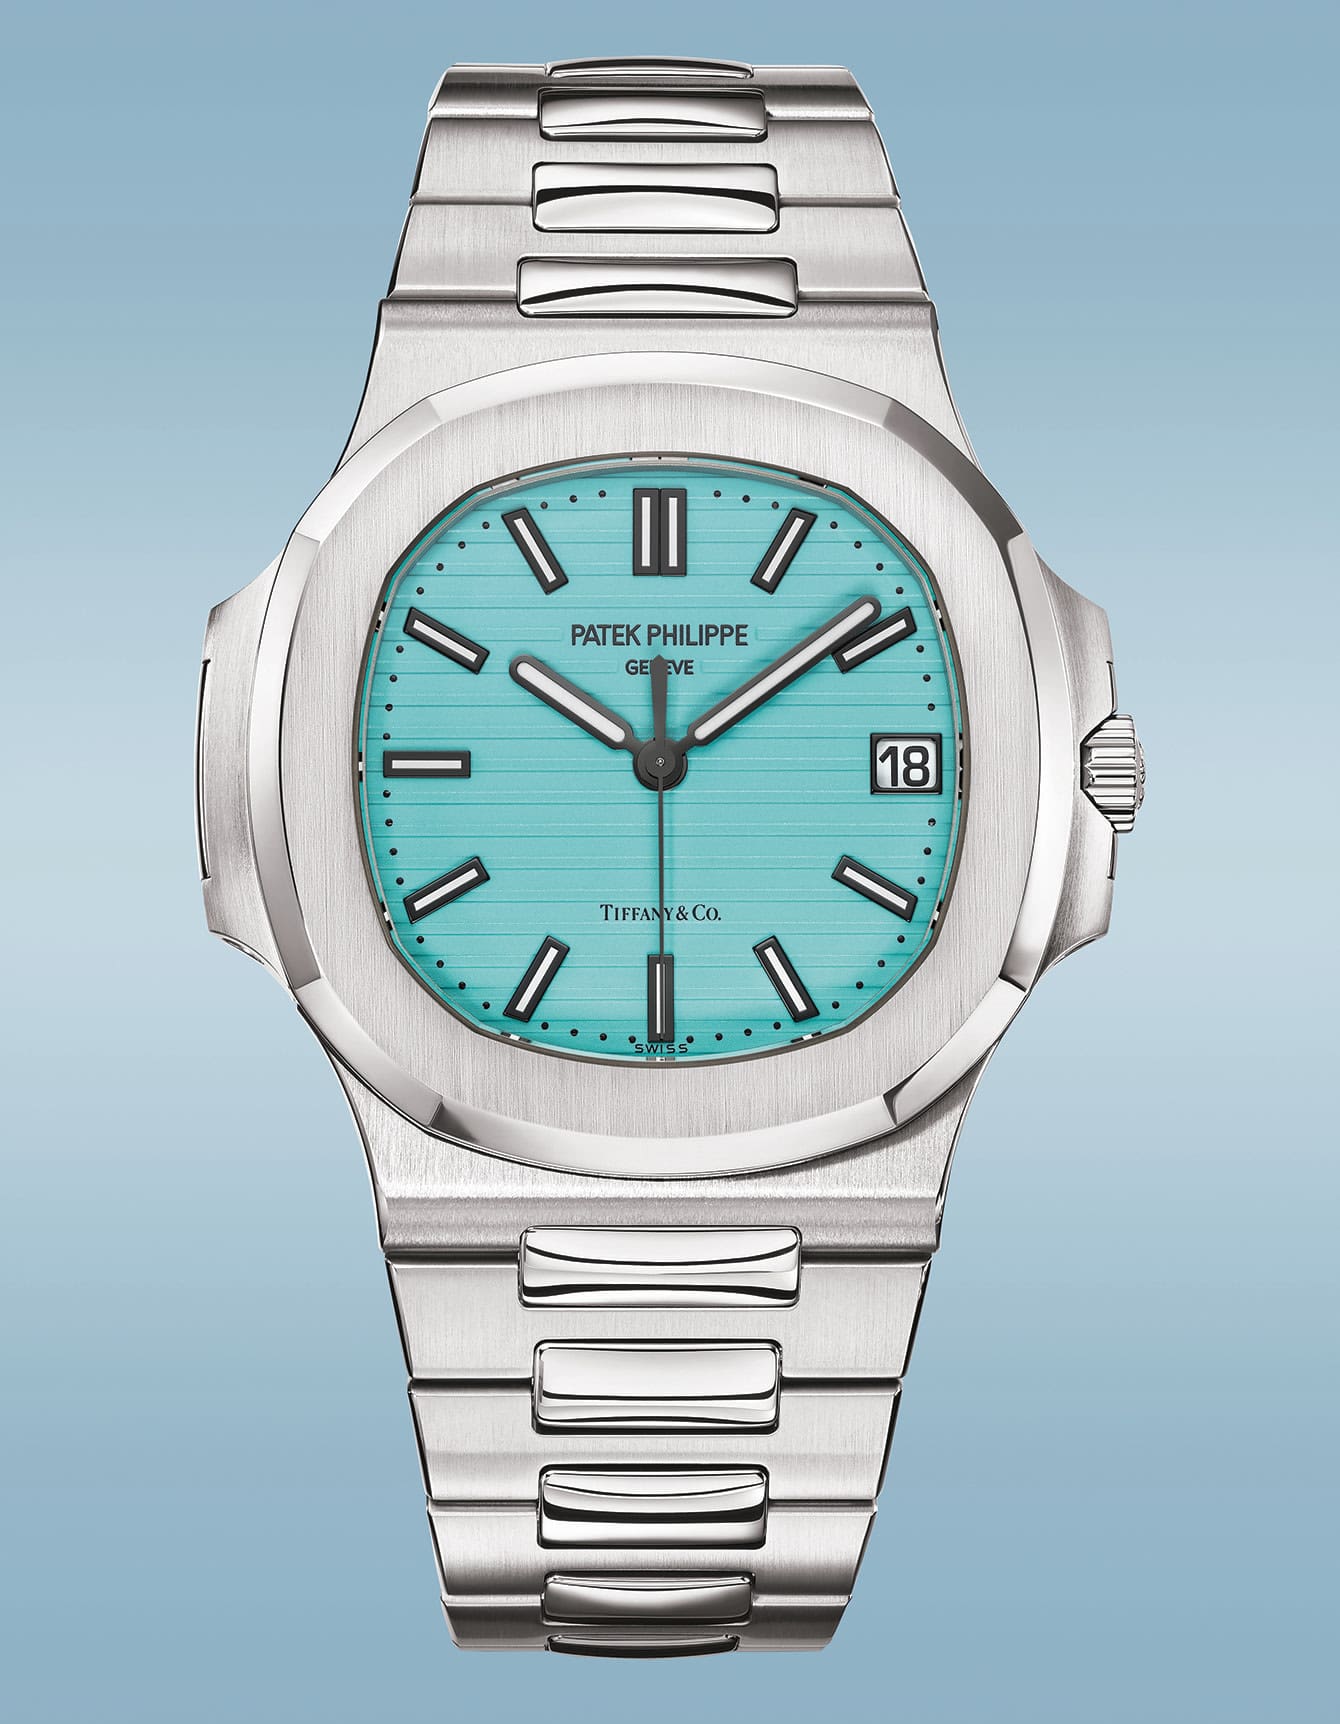 Patek Philippe - Nautilus 5711/1A-018 for Tiffany, Time and Watches